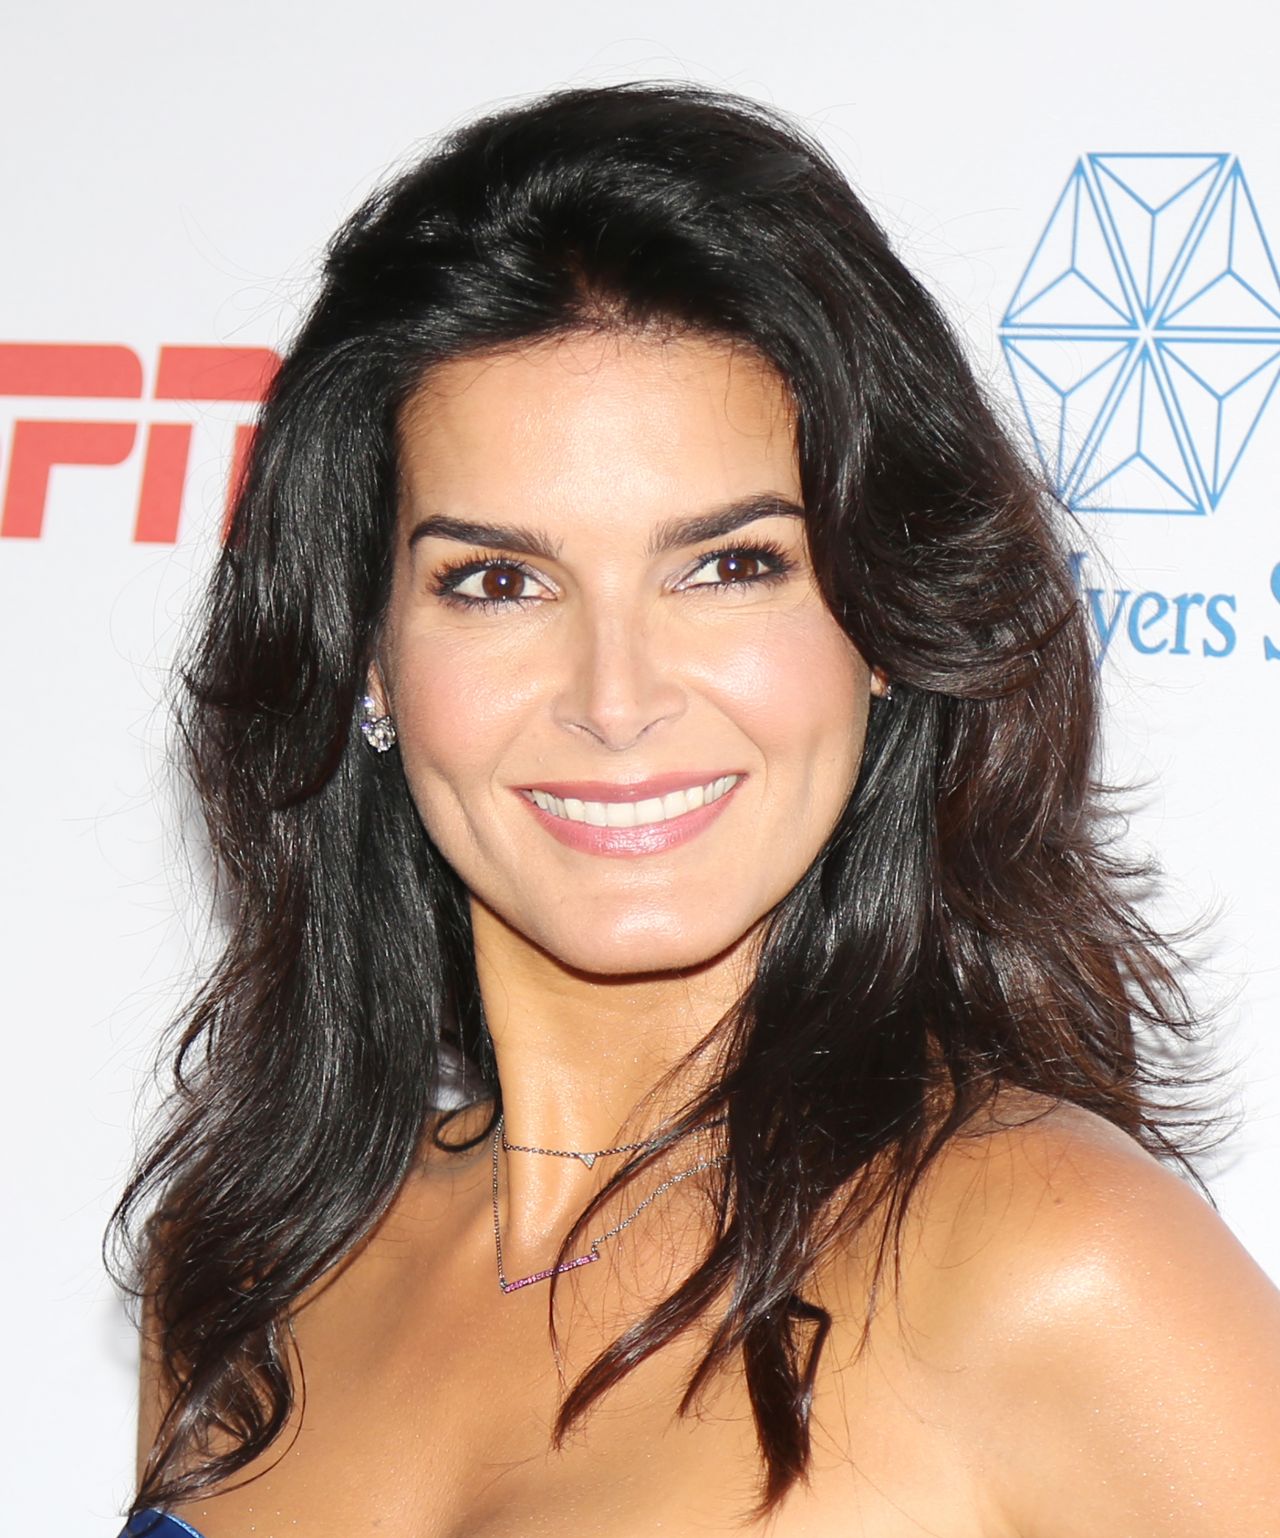 angie-harmon-sports-humanitarian-of-the-year-award-in-los-angeles-07-11-201...